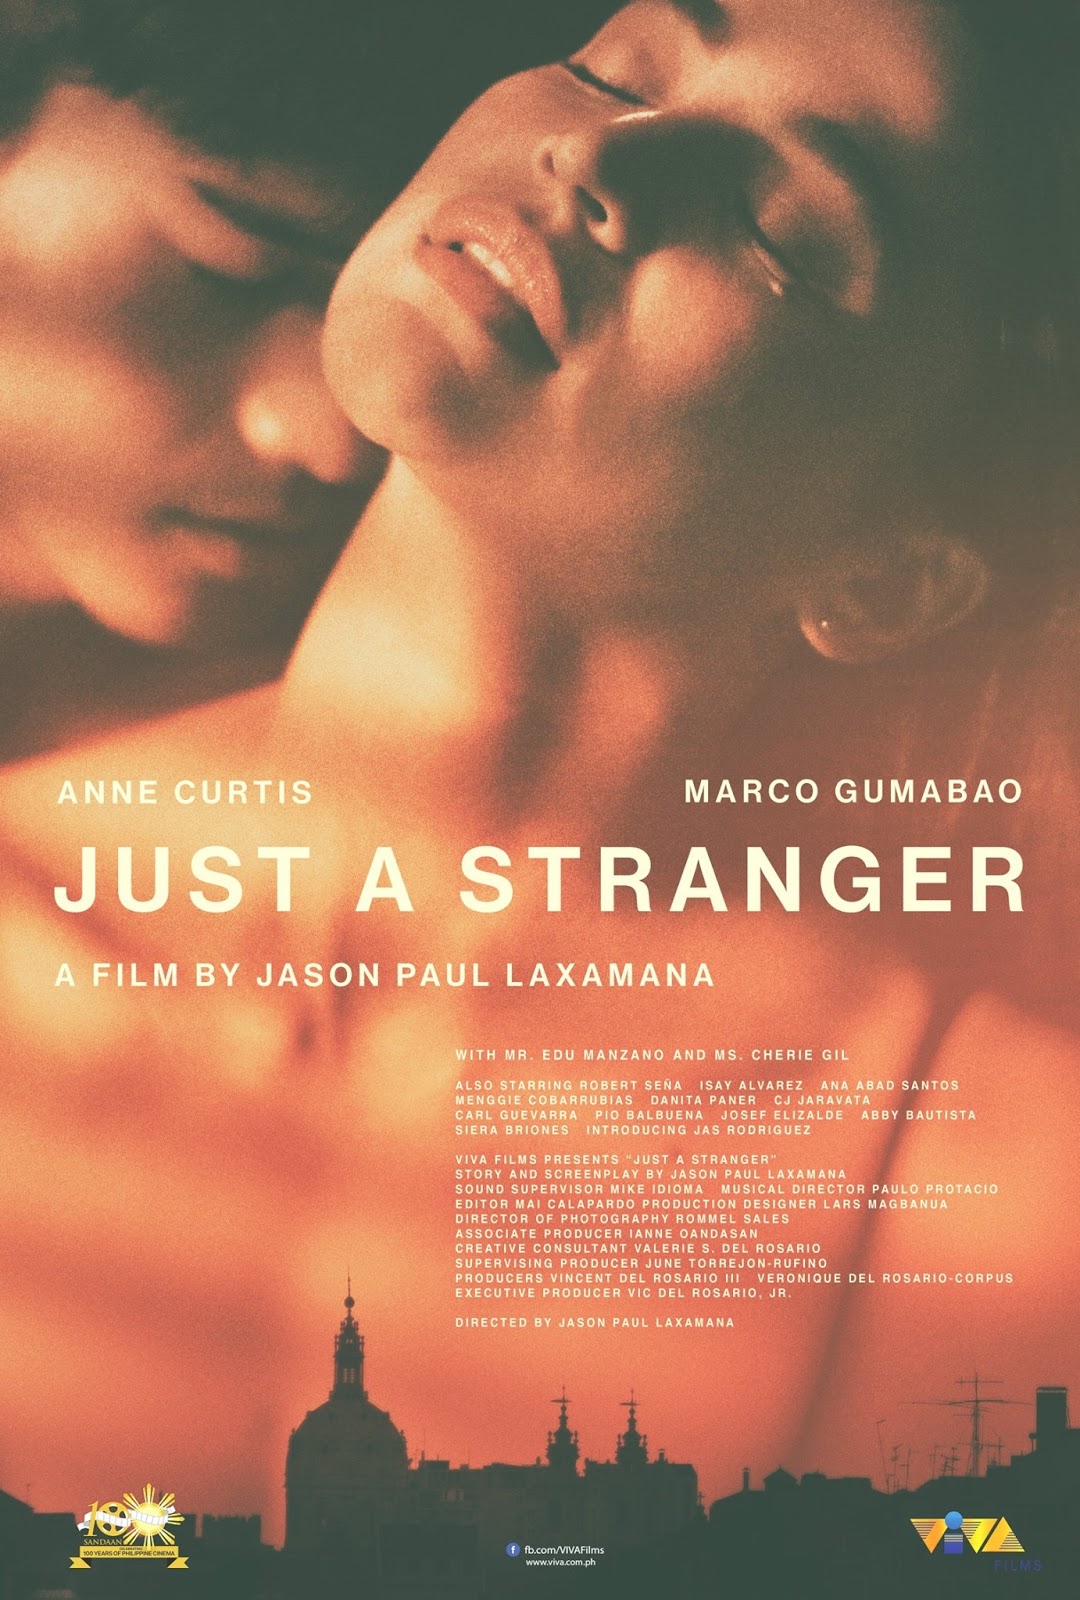 Lakwatsera Lovers Anne Curtis And Marco Gumabao Go Intimate In The Romantic Drama Just A Stranger